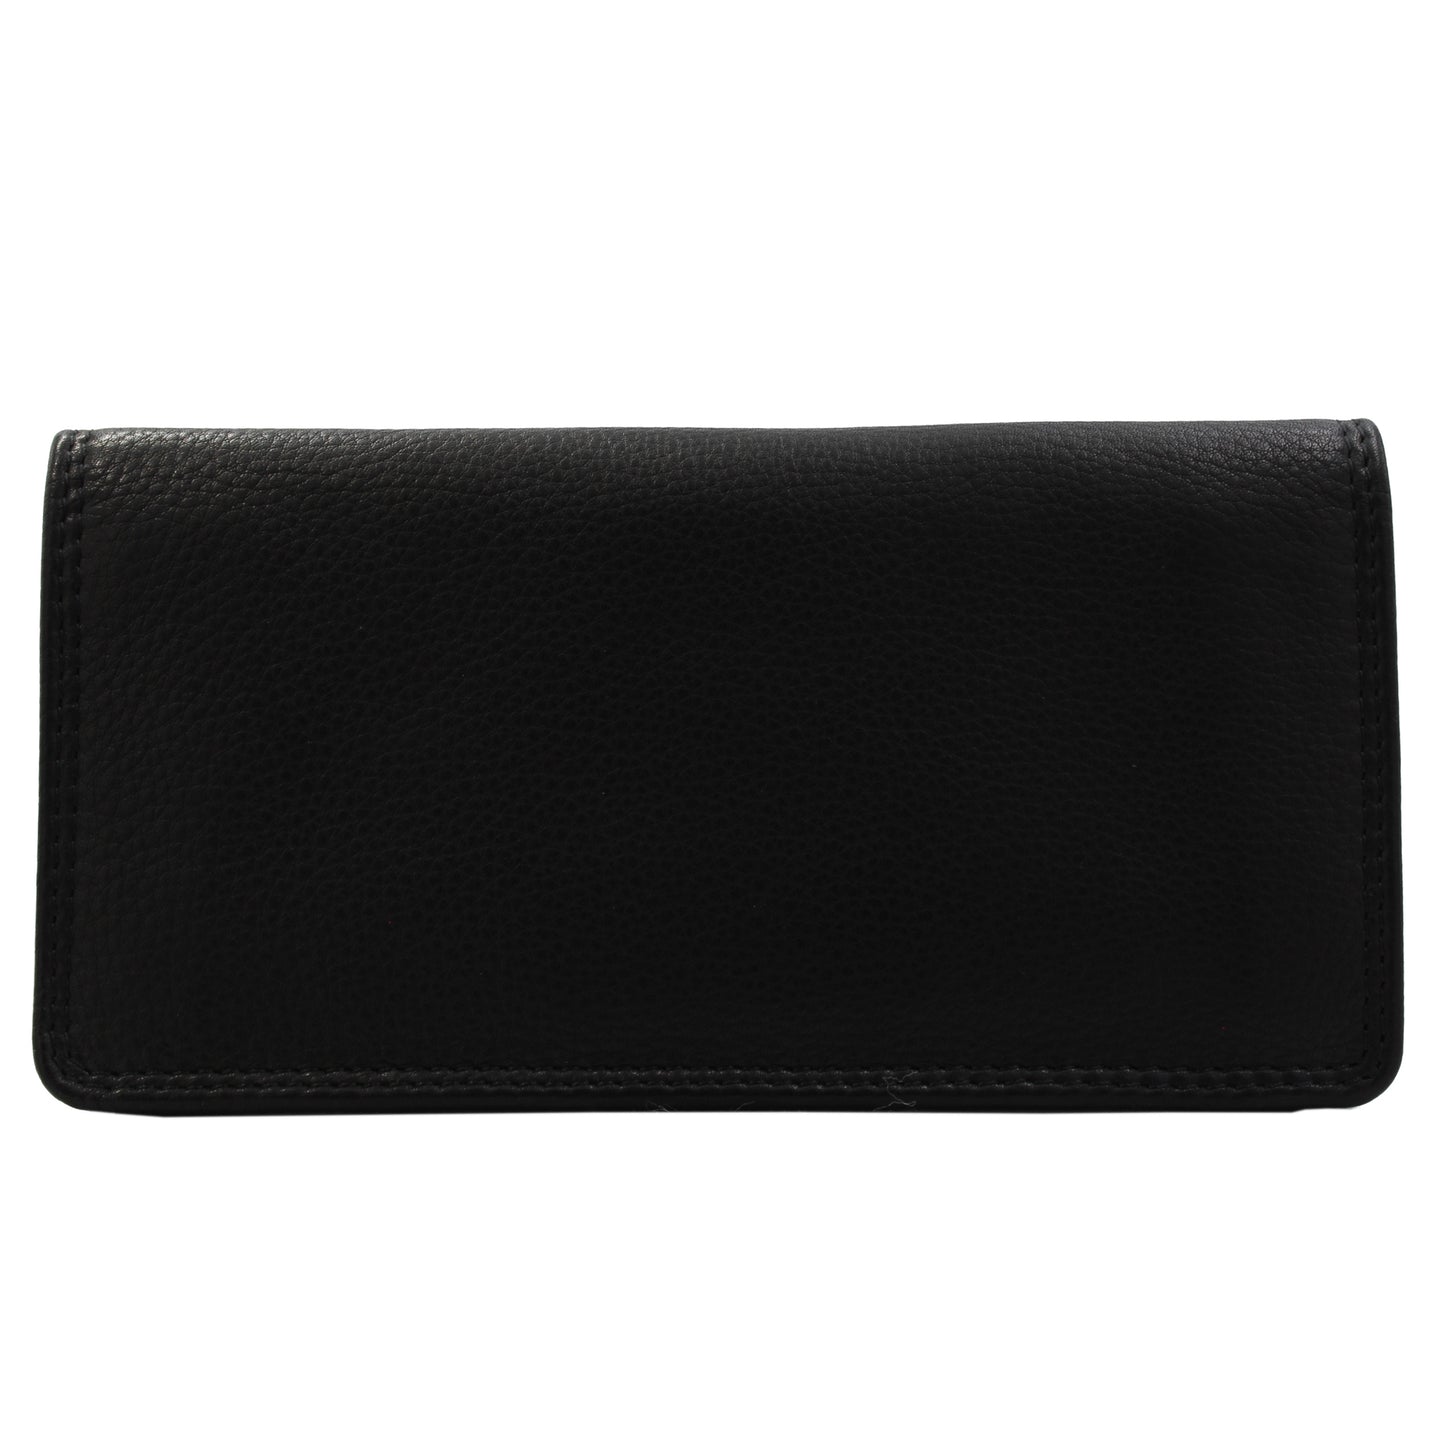 RE Leather Wallet - Trifold Clutch